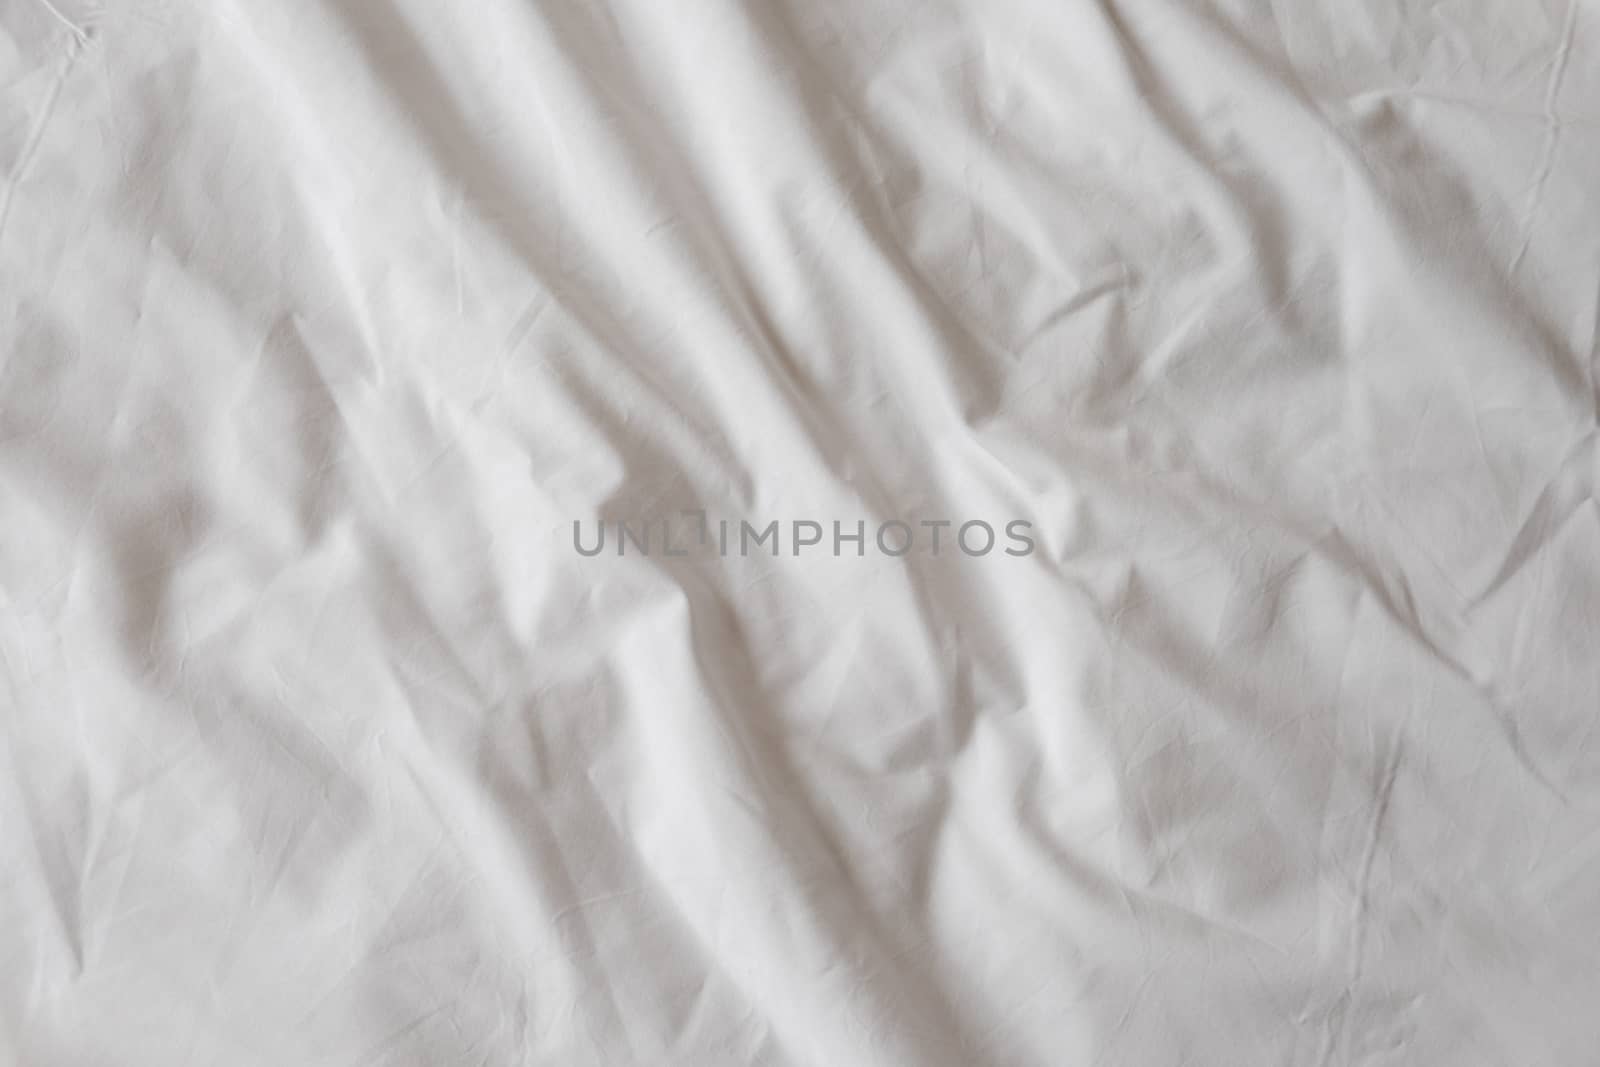 Background of white rumpled sheets. Bed linen with wrinkles in day light. Horizontal. Copy spase. Concept of rest, awakening, sleep. For social media, blog.